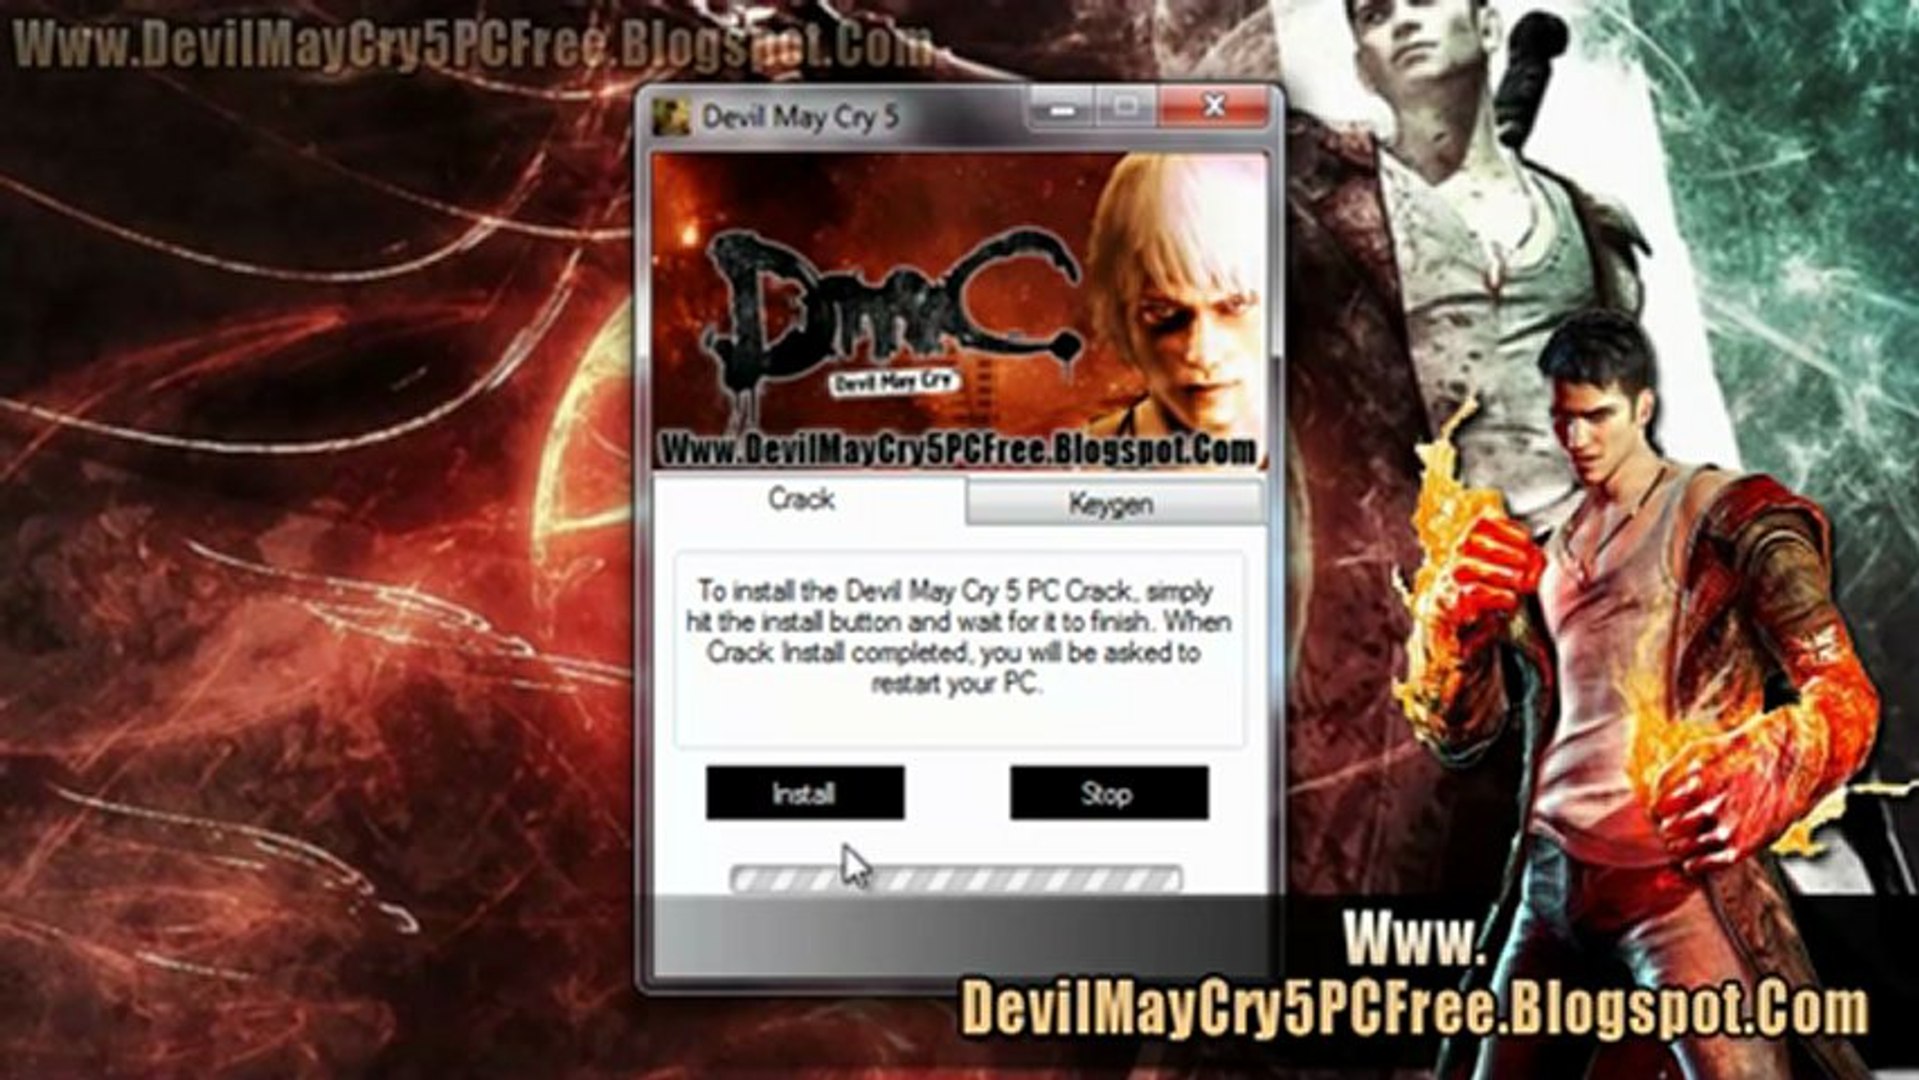 How to Download Devil May Cry 5 Game Crack Free on PC - Tutorial - video  Dailymotion